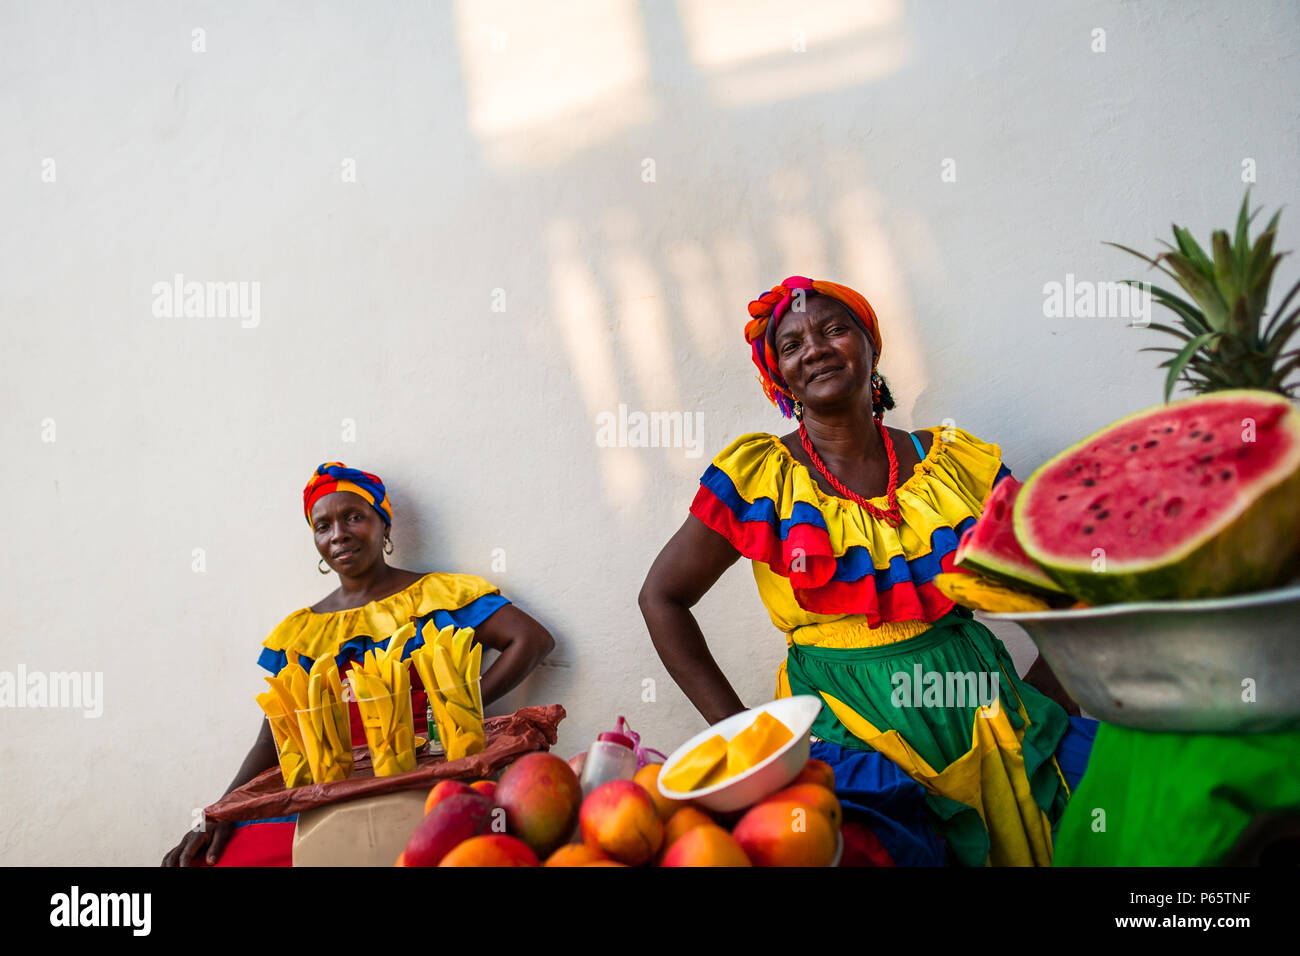 Afro-Colombian women, dressed in the traditional ‘palenquera’ costume, sell fruits on the street of Cartagena, Colombia. Stock Photo